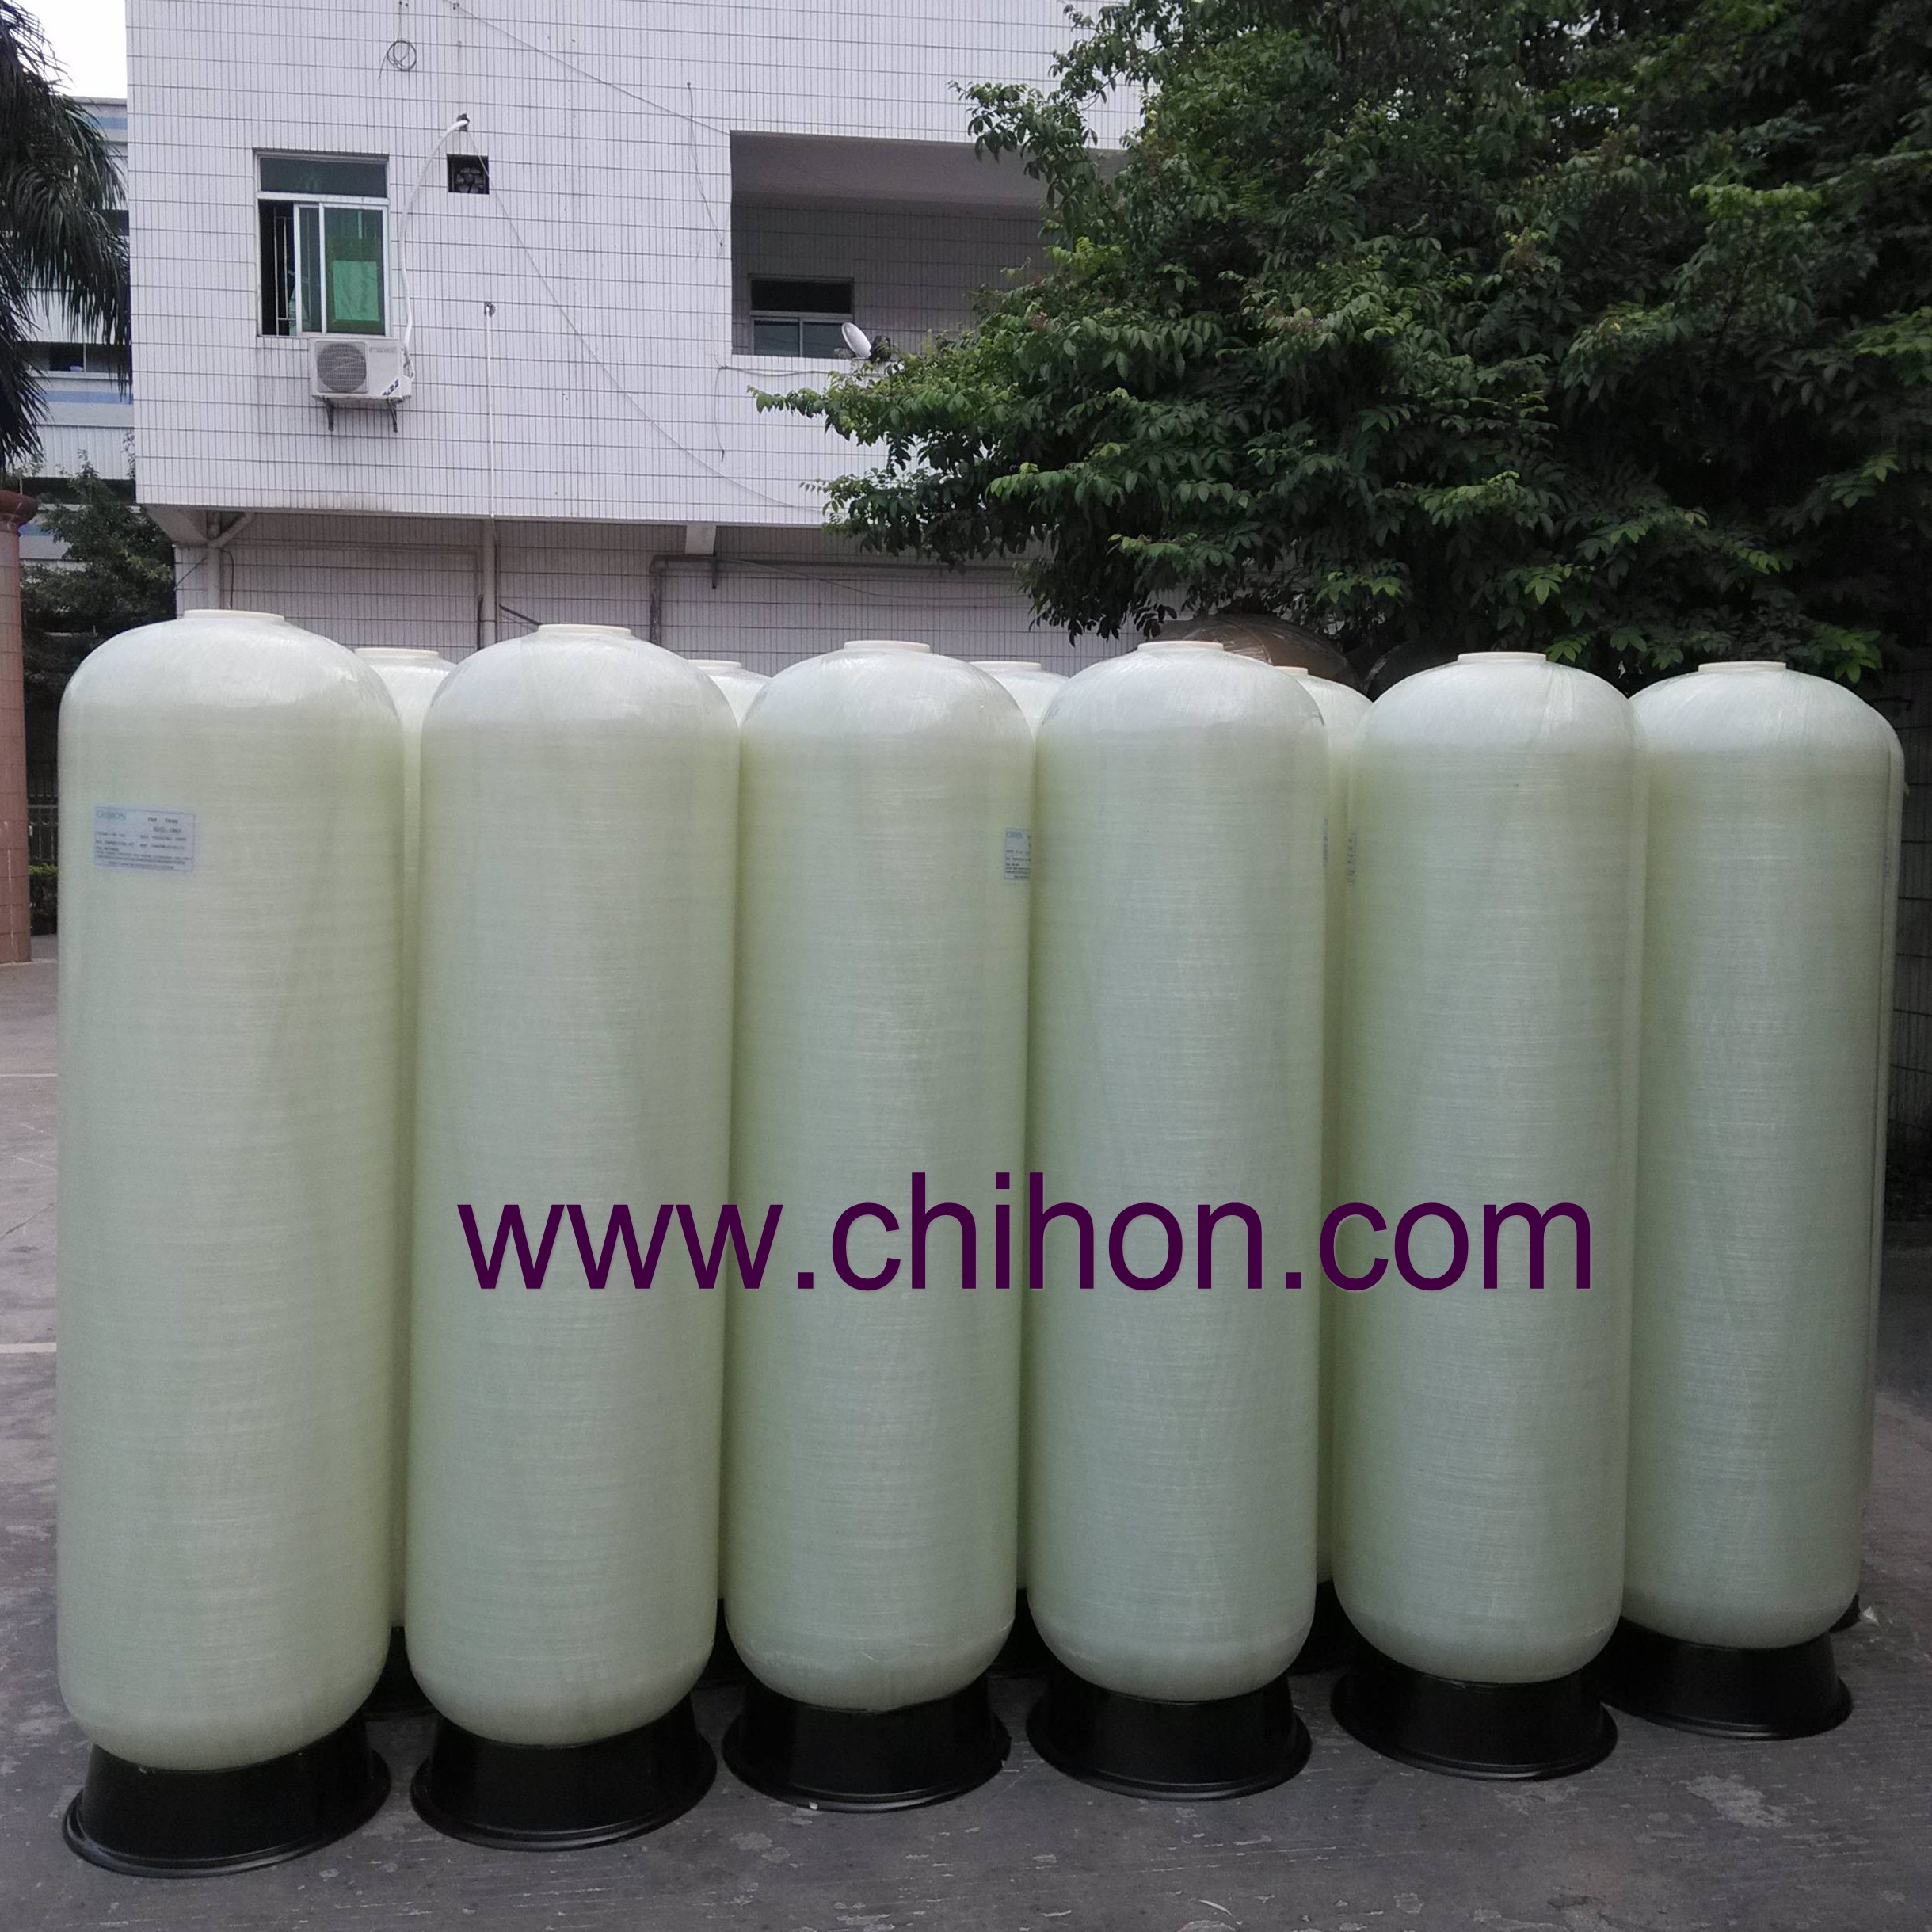 1865 ground water softener tank pond filter with vertical cylindrical shape